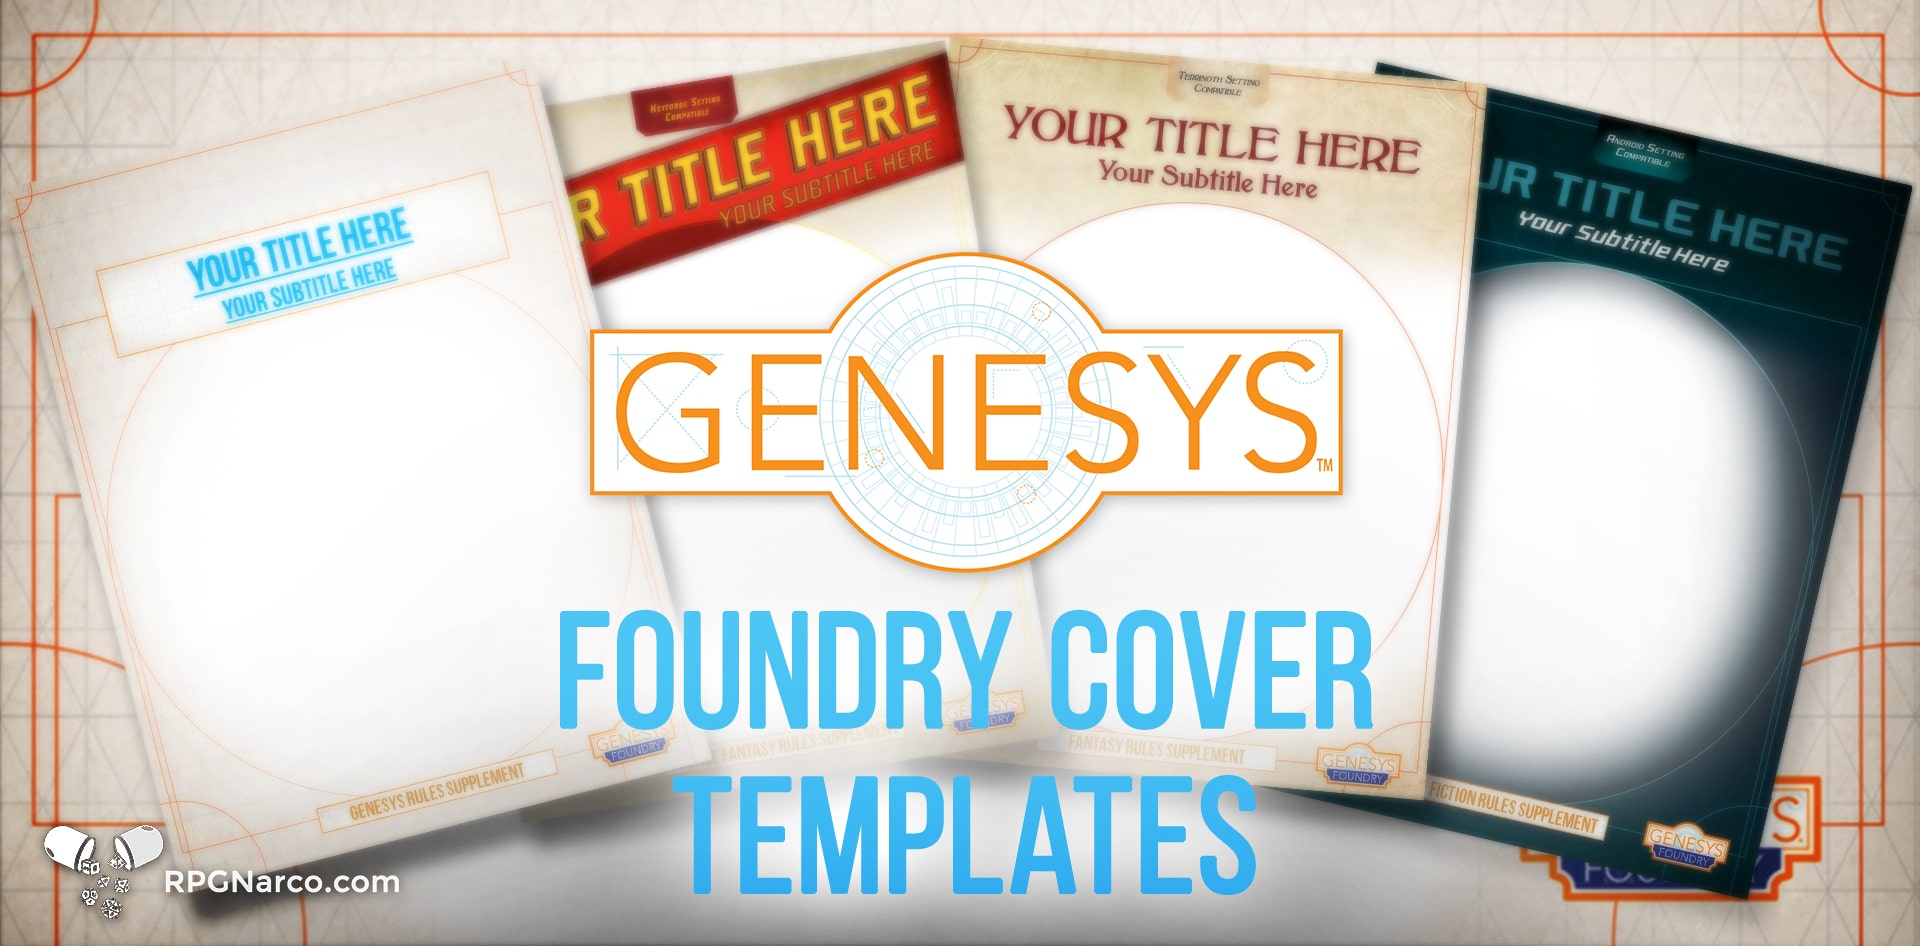 New free product: Genesys Foundry Cover Templates